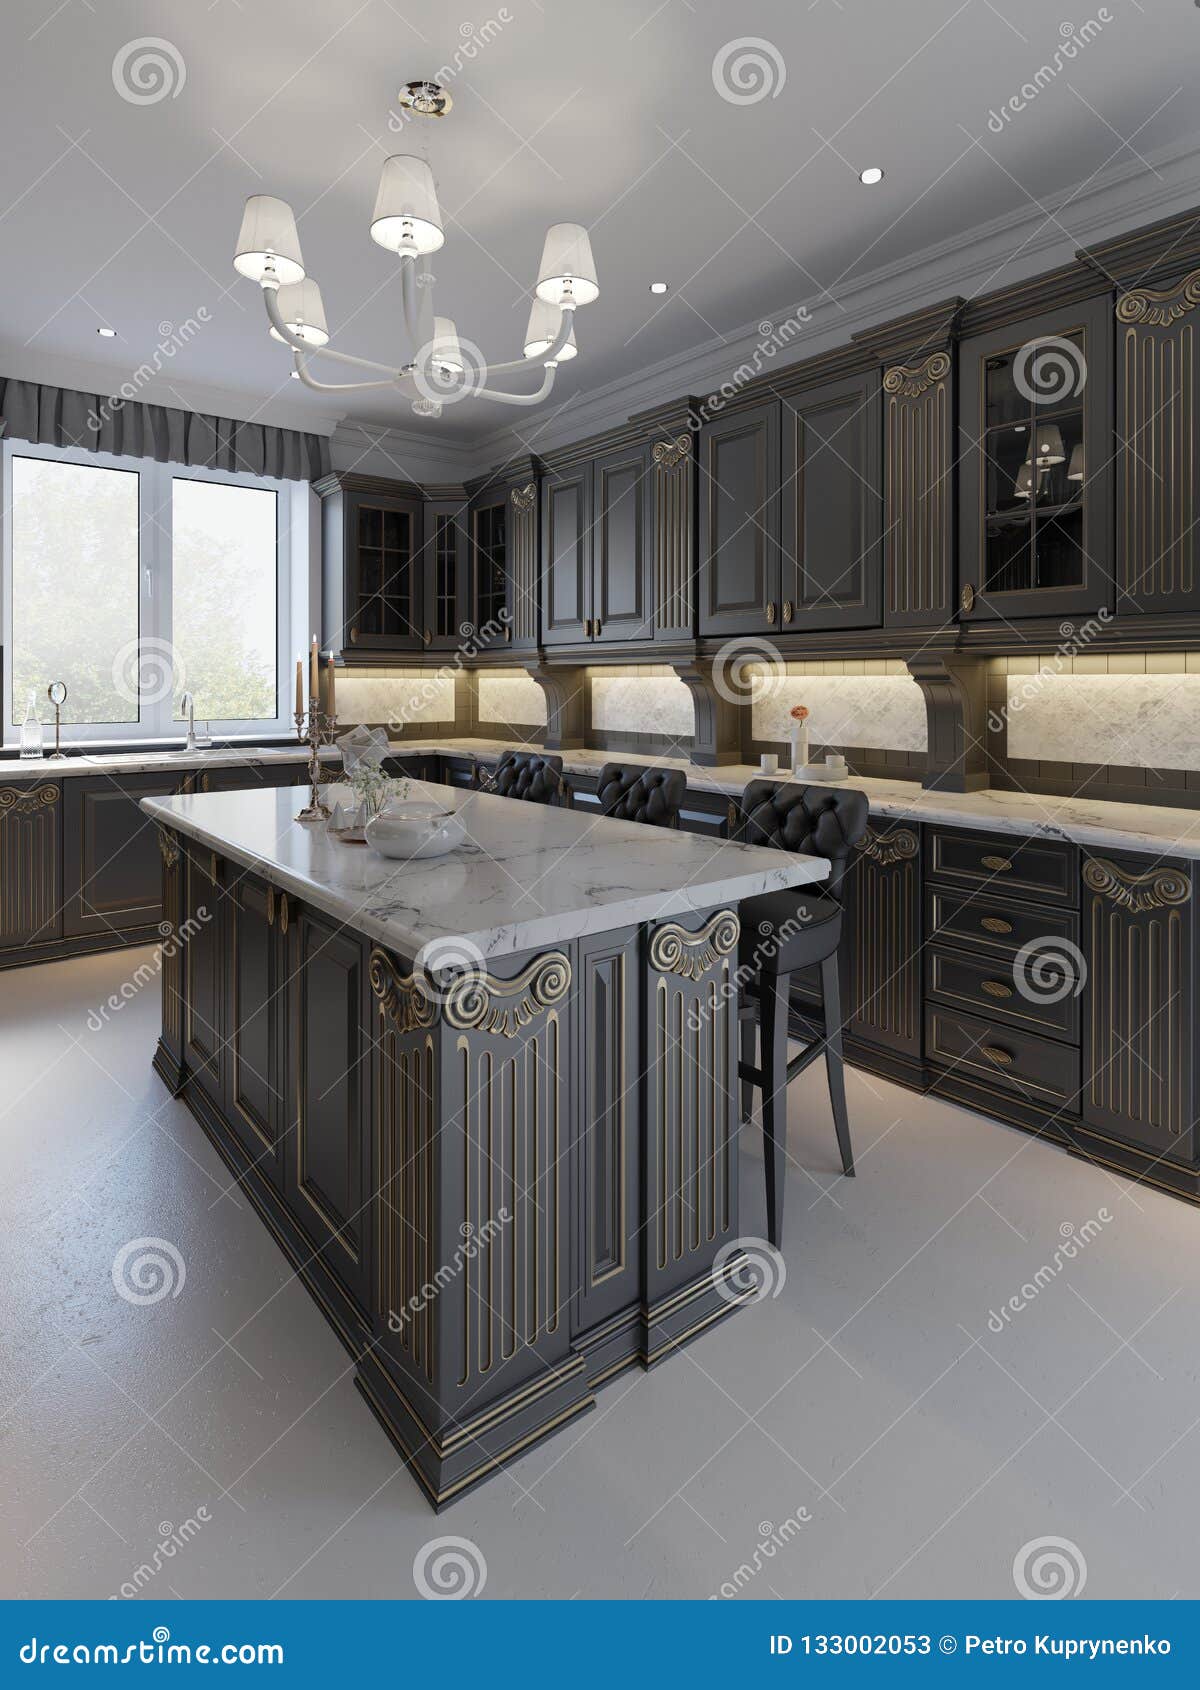 Beautiful Kitchen In Luxury Home With Island Pendant Lights